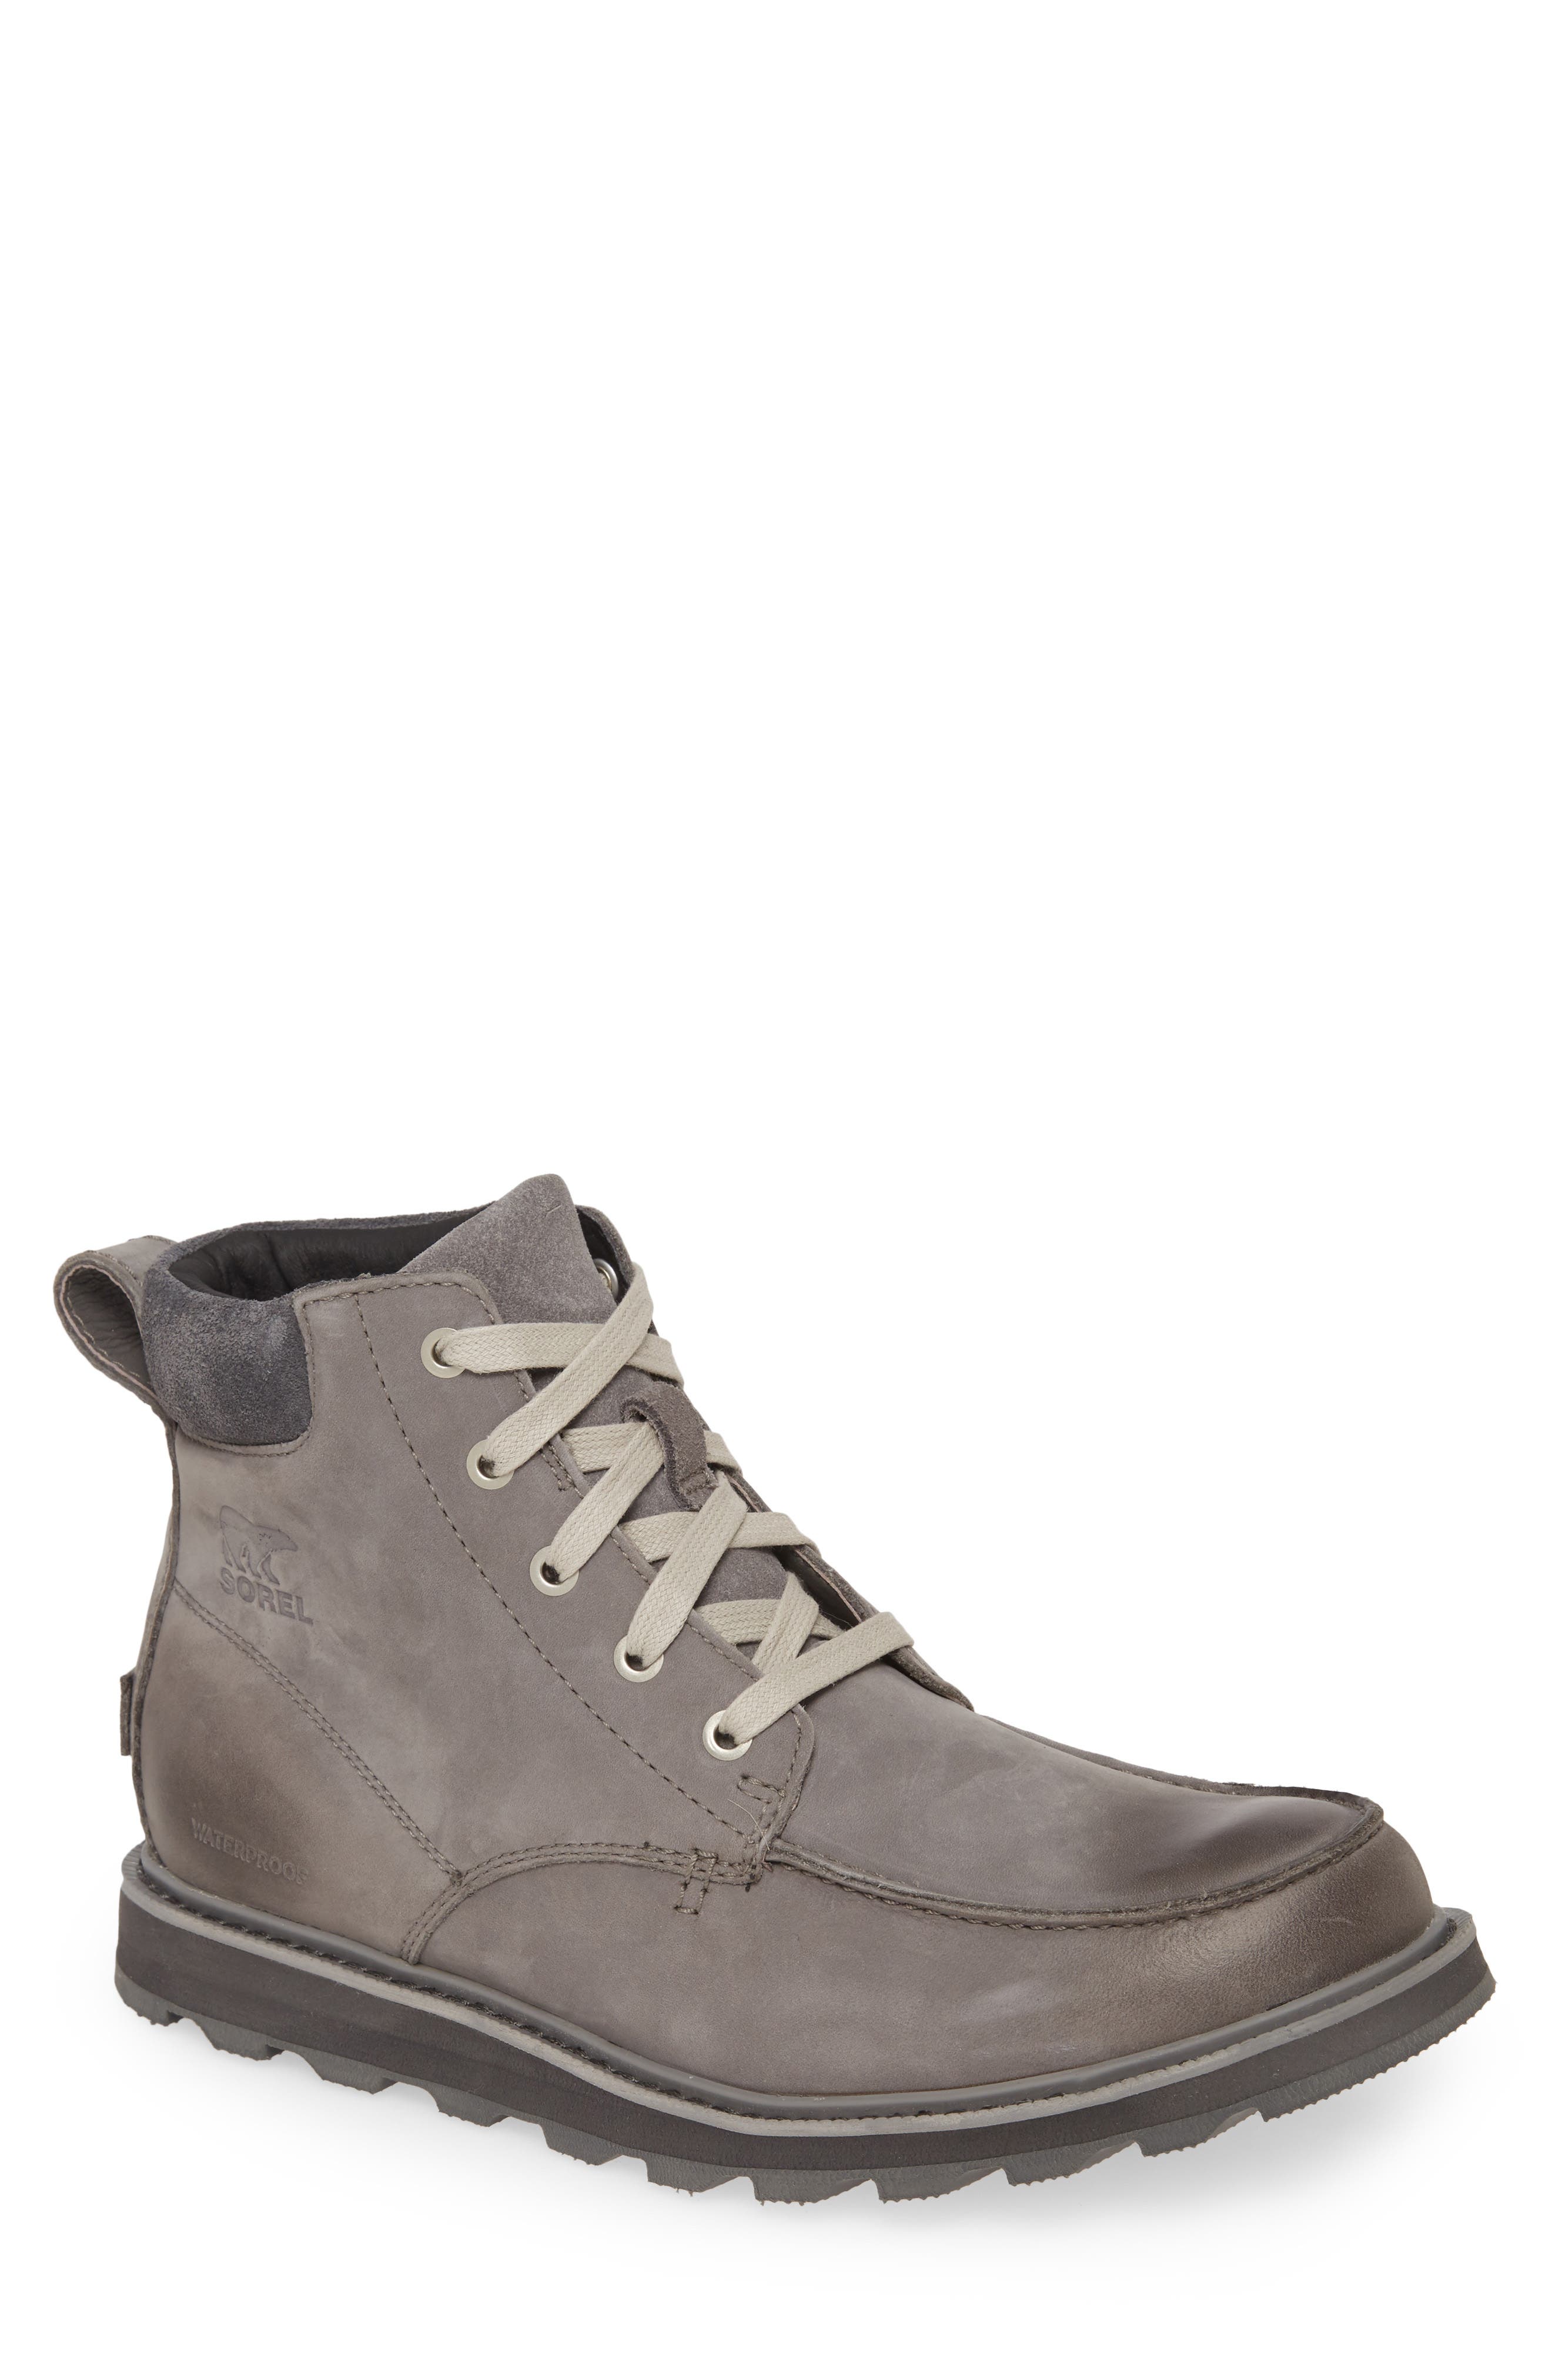 nordstrom mens snow boots